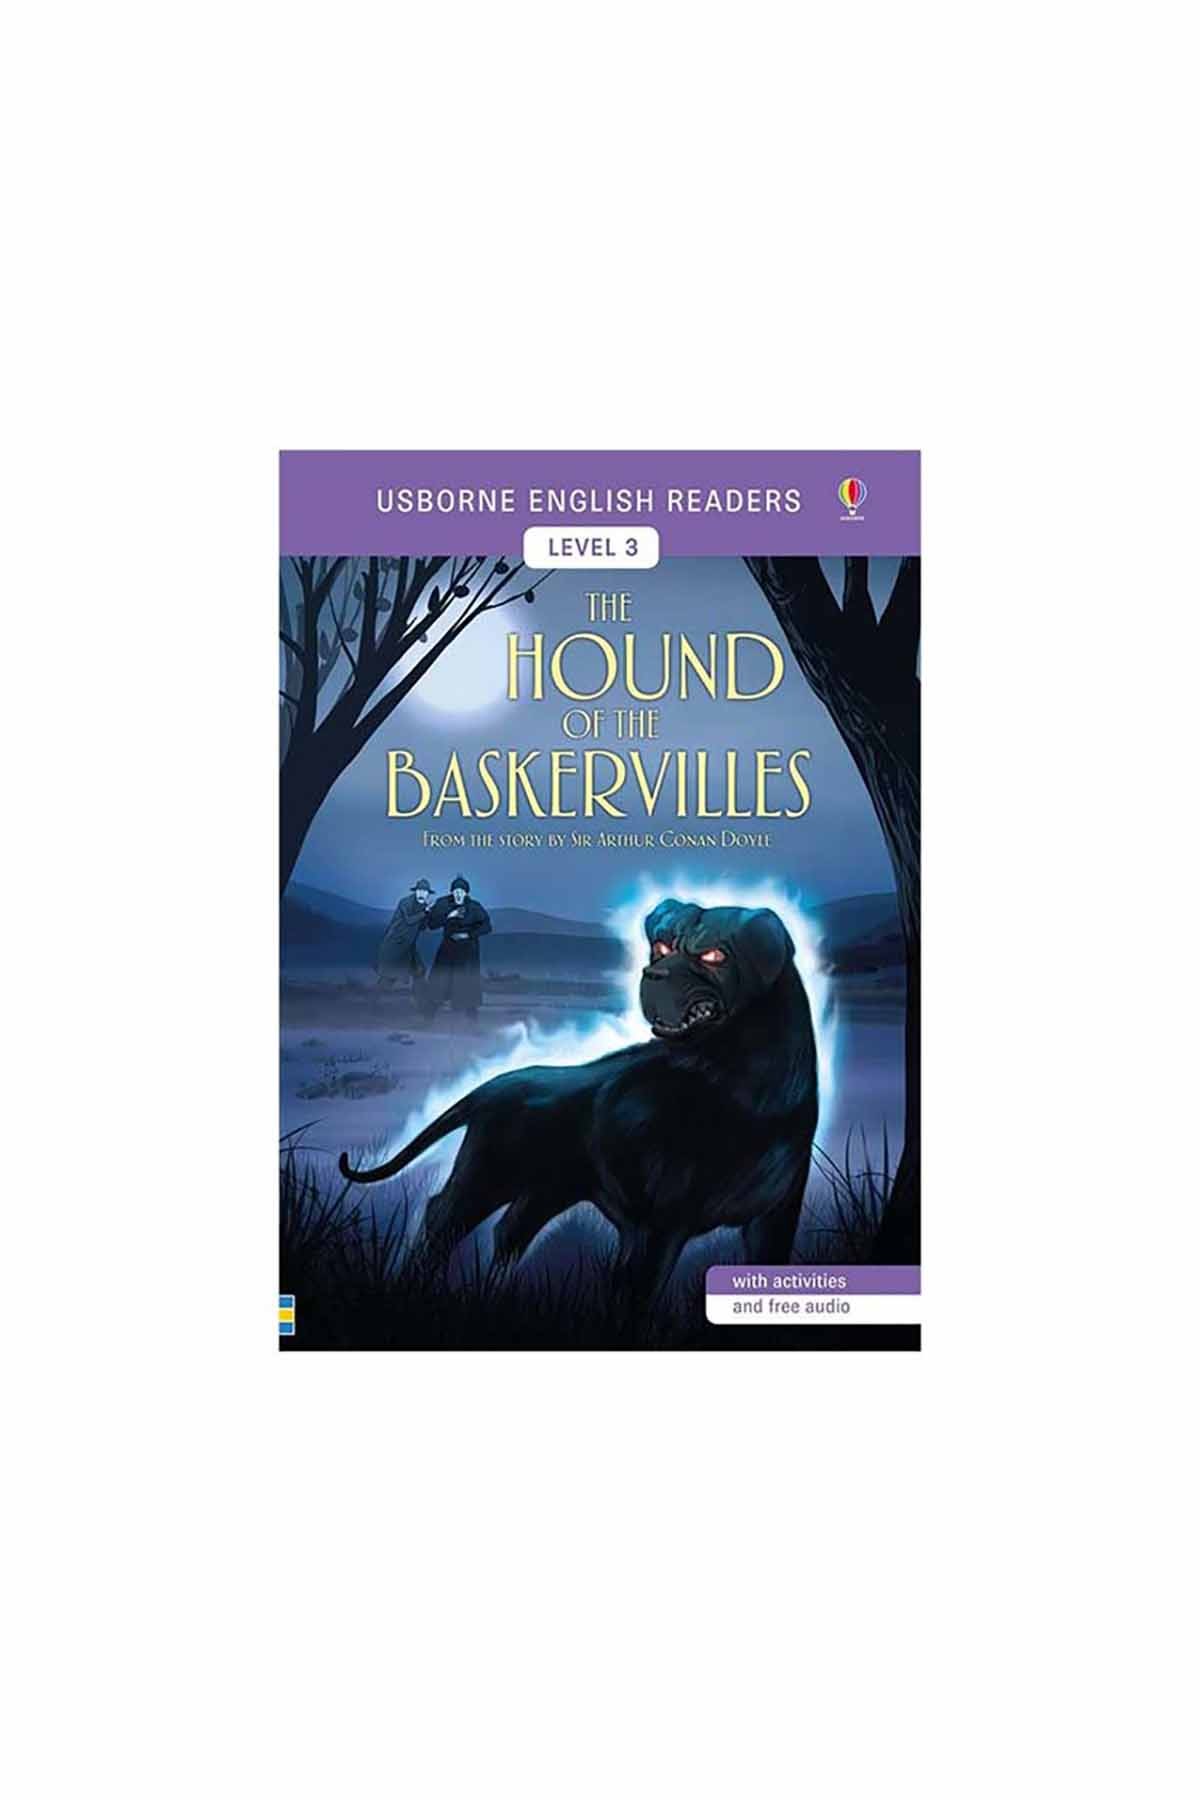 The Usborne The Hound of the Baskervilles